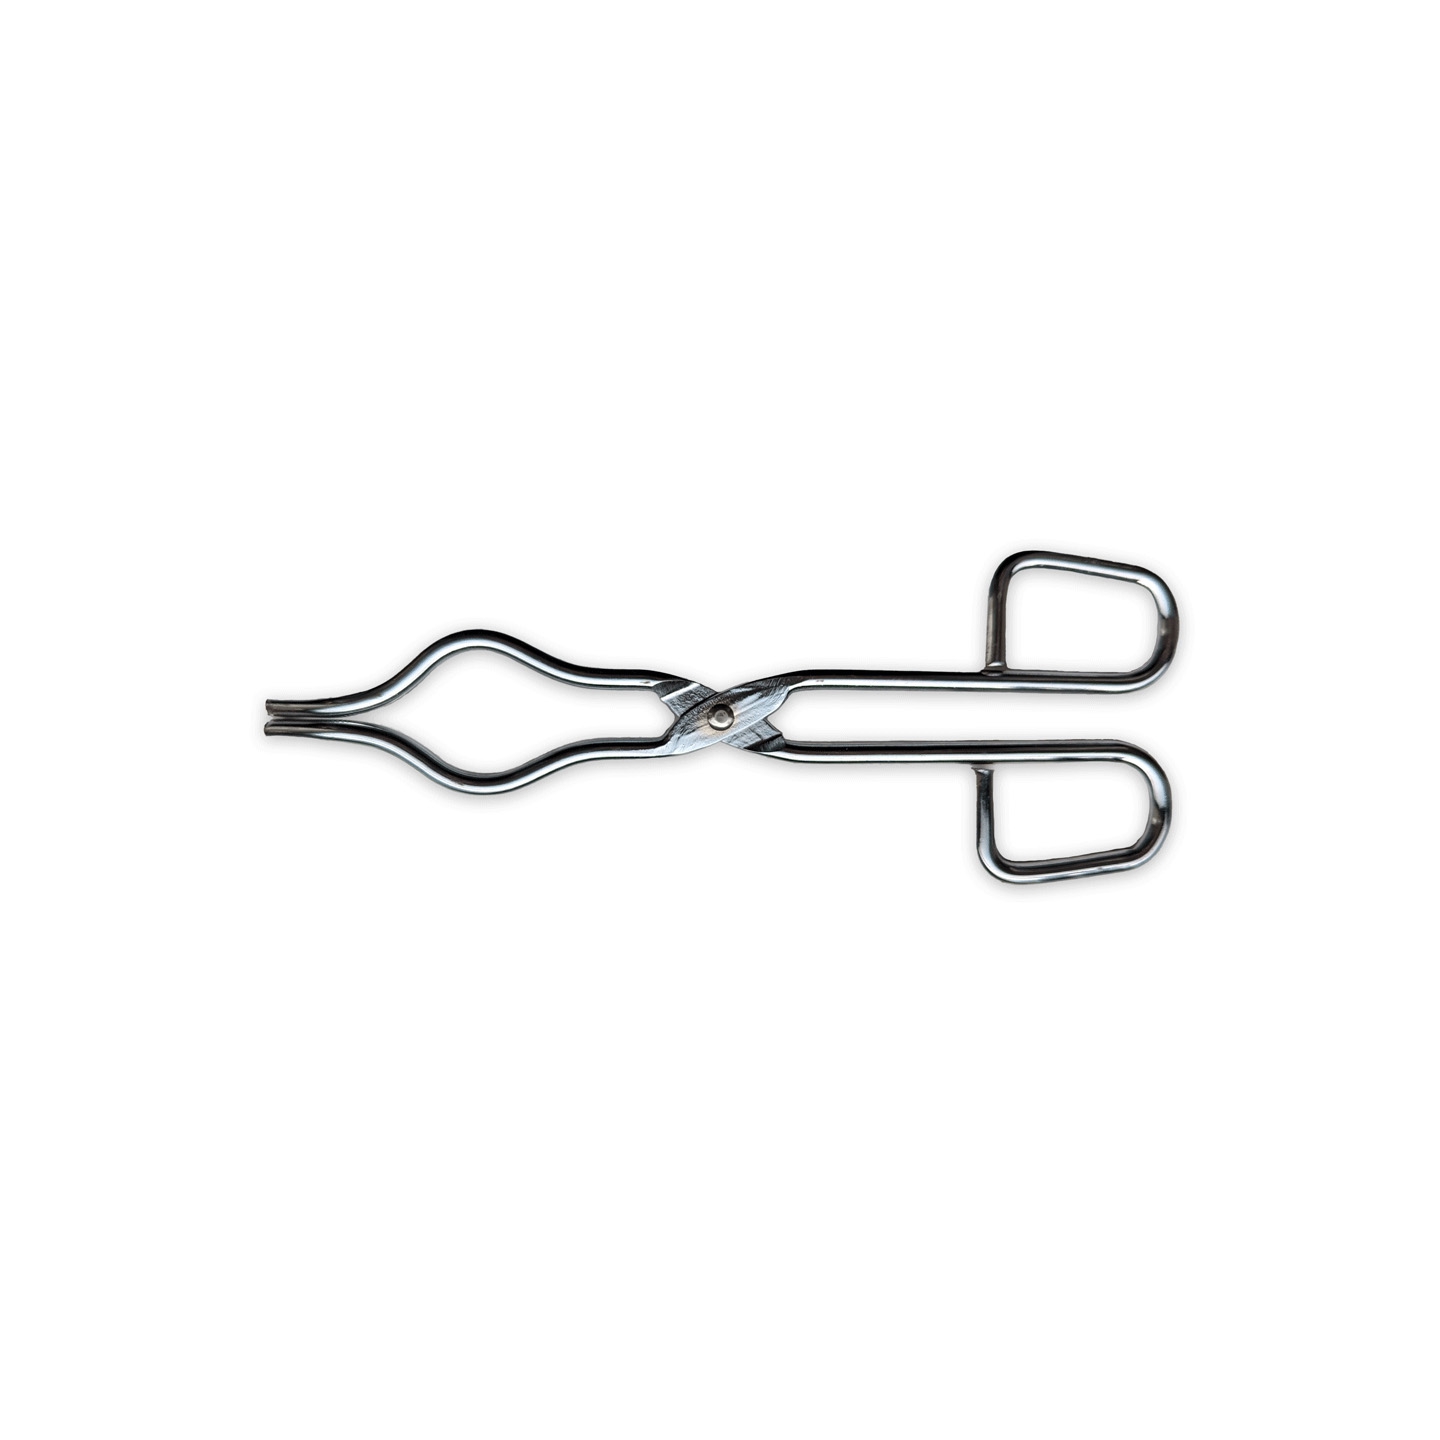 Crucible Tong, Stainless Steel, Length 300mm, Bow Curved Tips, Flat Hinge